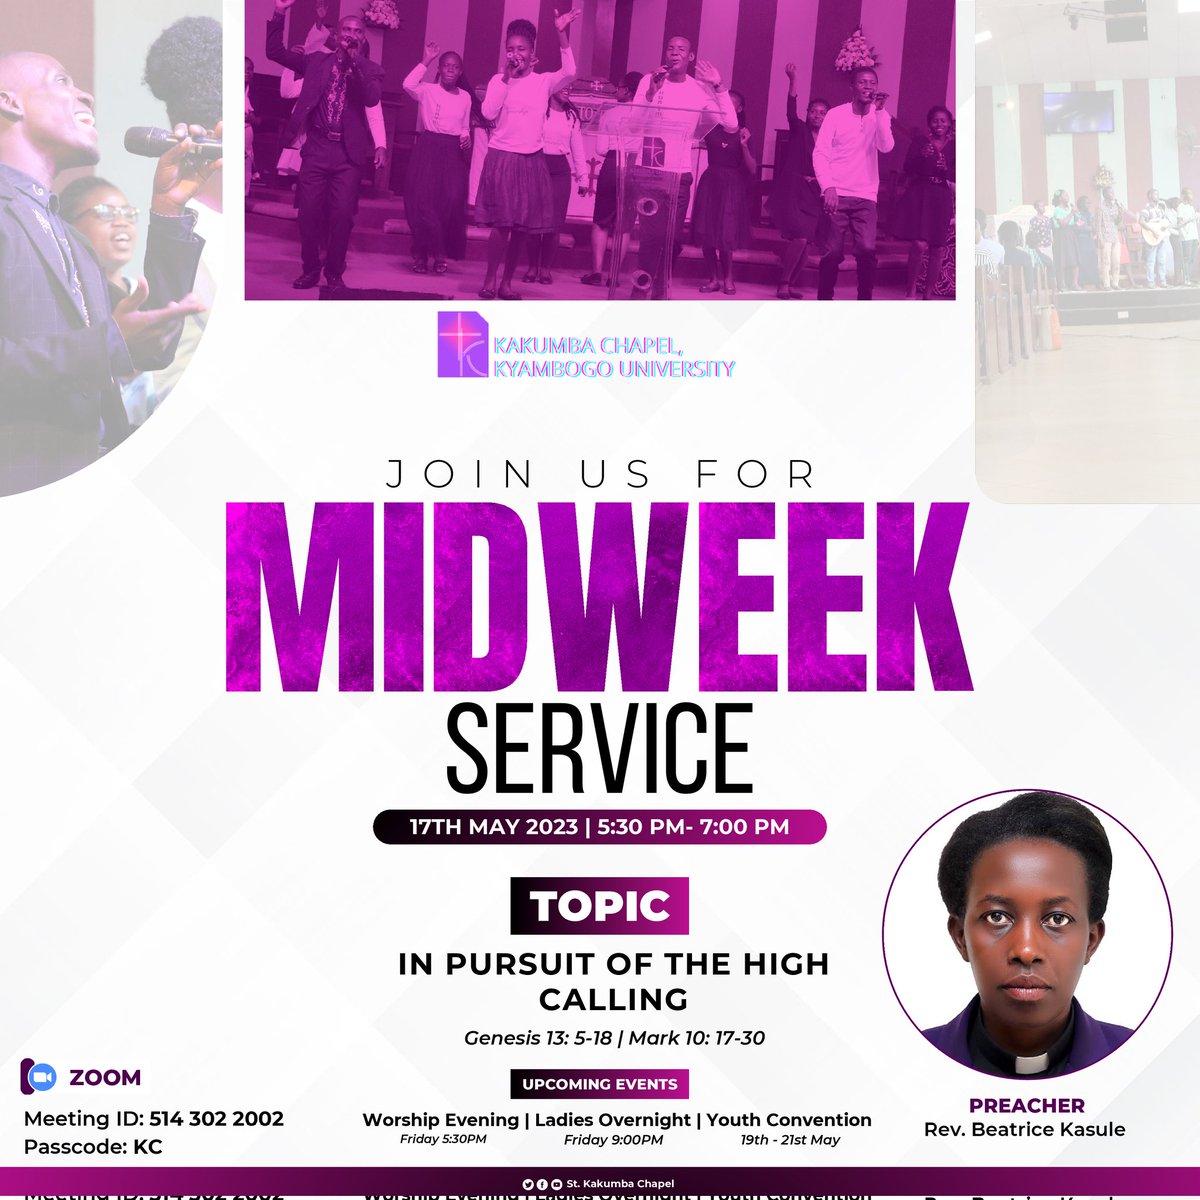 Come and fellowship with us in Midweek Service today at 5:30pm.